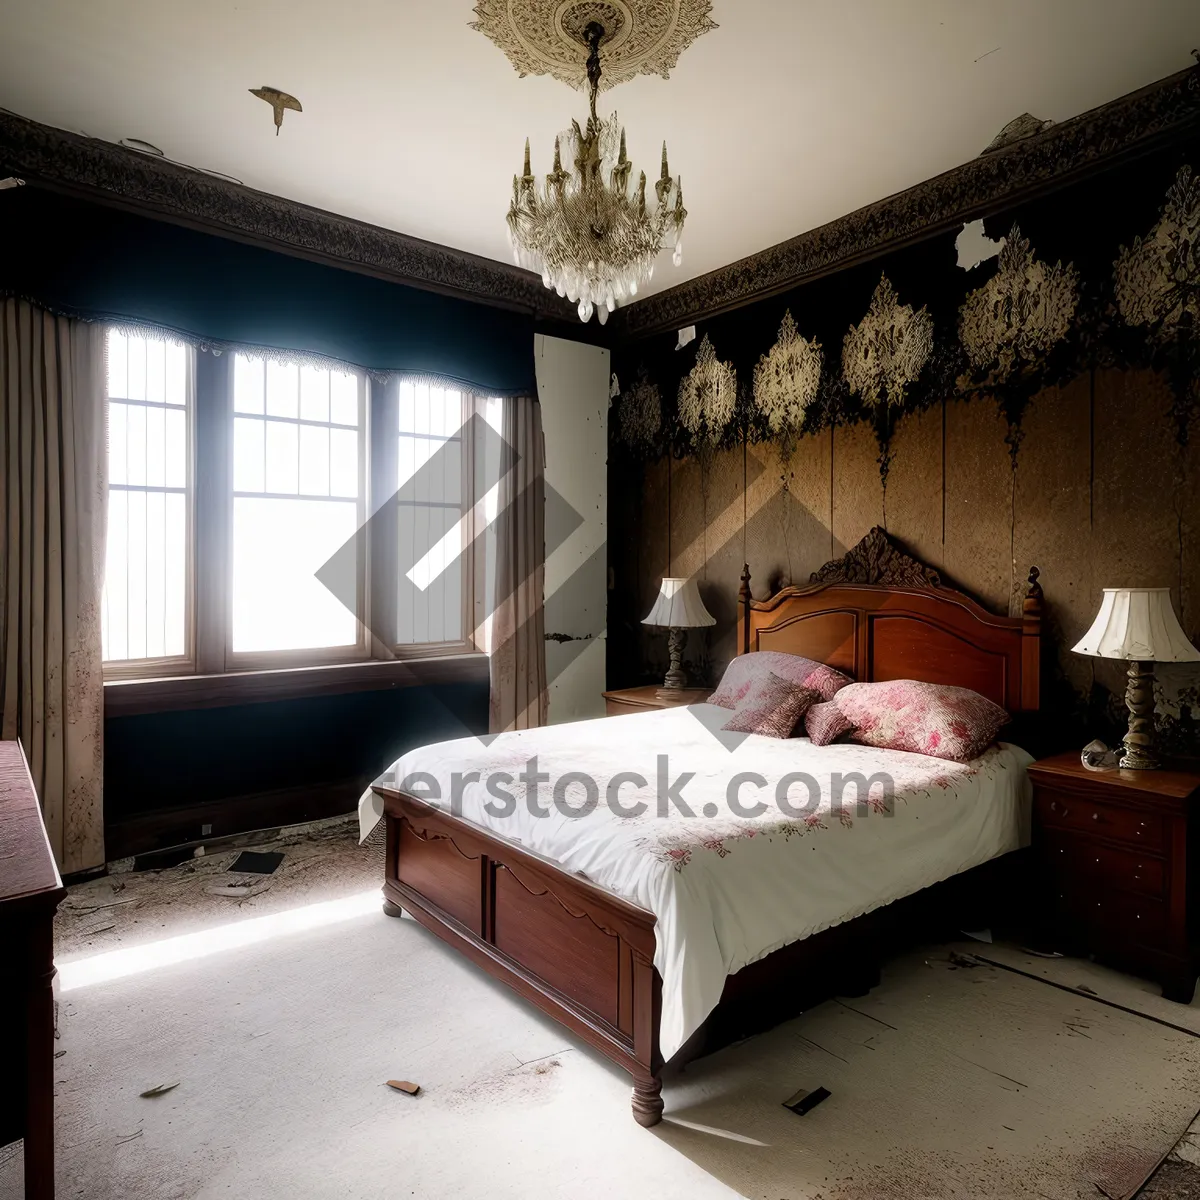 Picture of Luxurious Bedroom Retreat with Modern Four-Poster Bed.